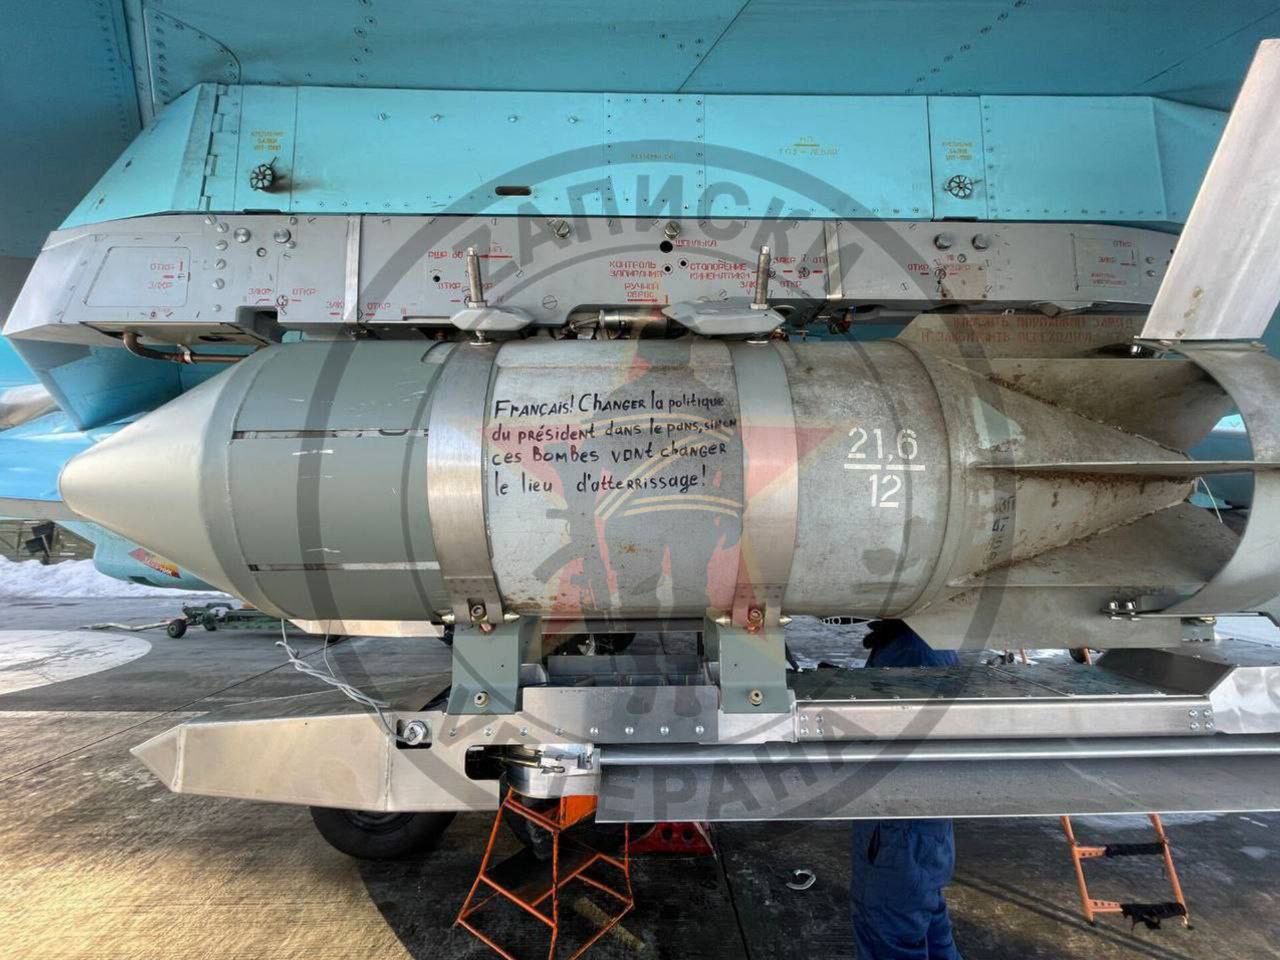 The Russians wrote a message to the French on the bomb.